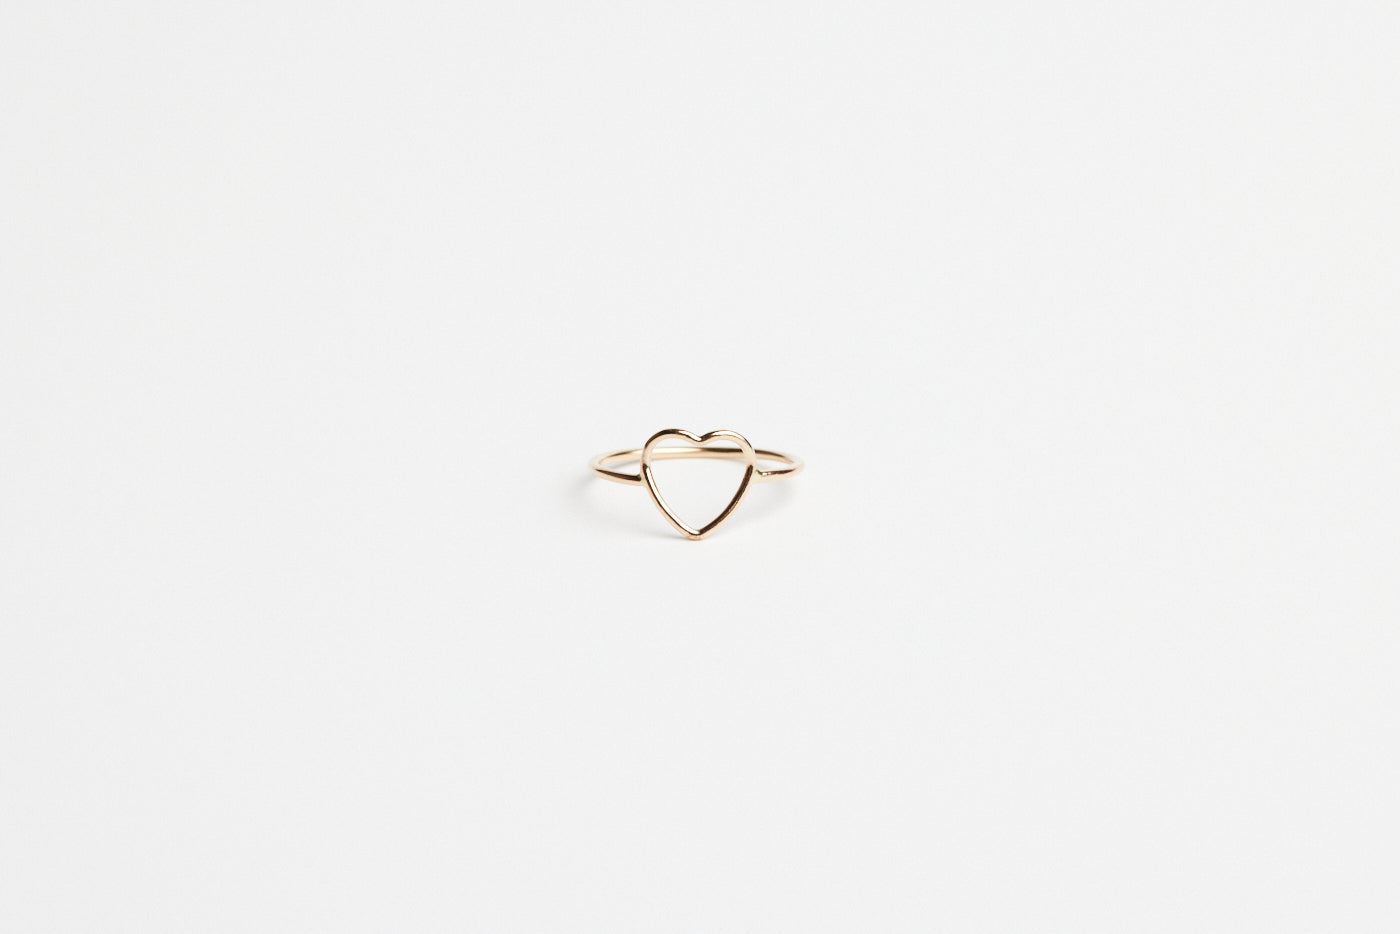 Able Valentine's Heart Ring